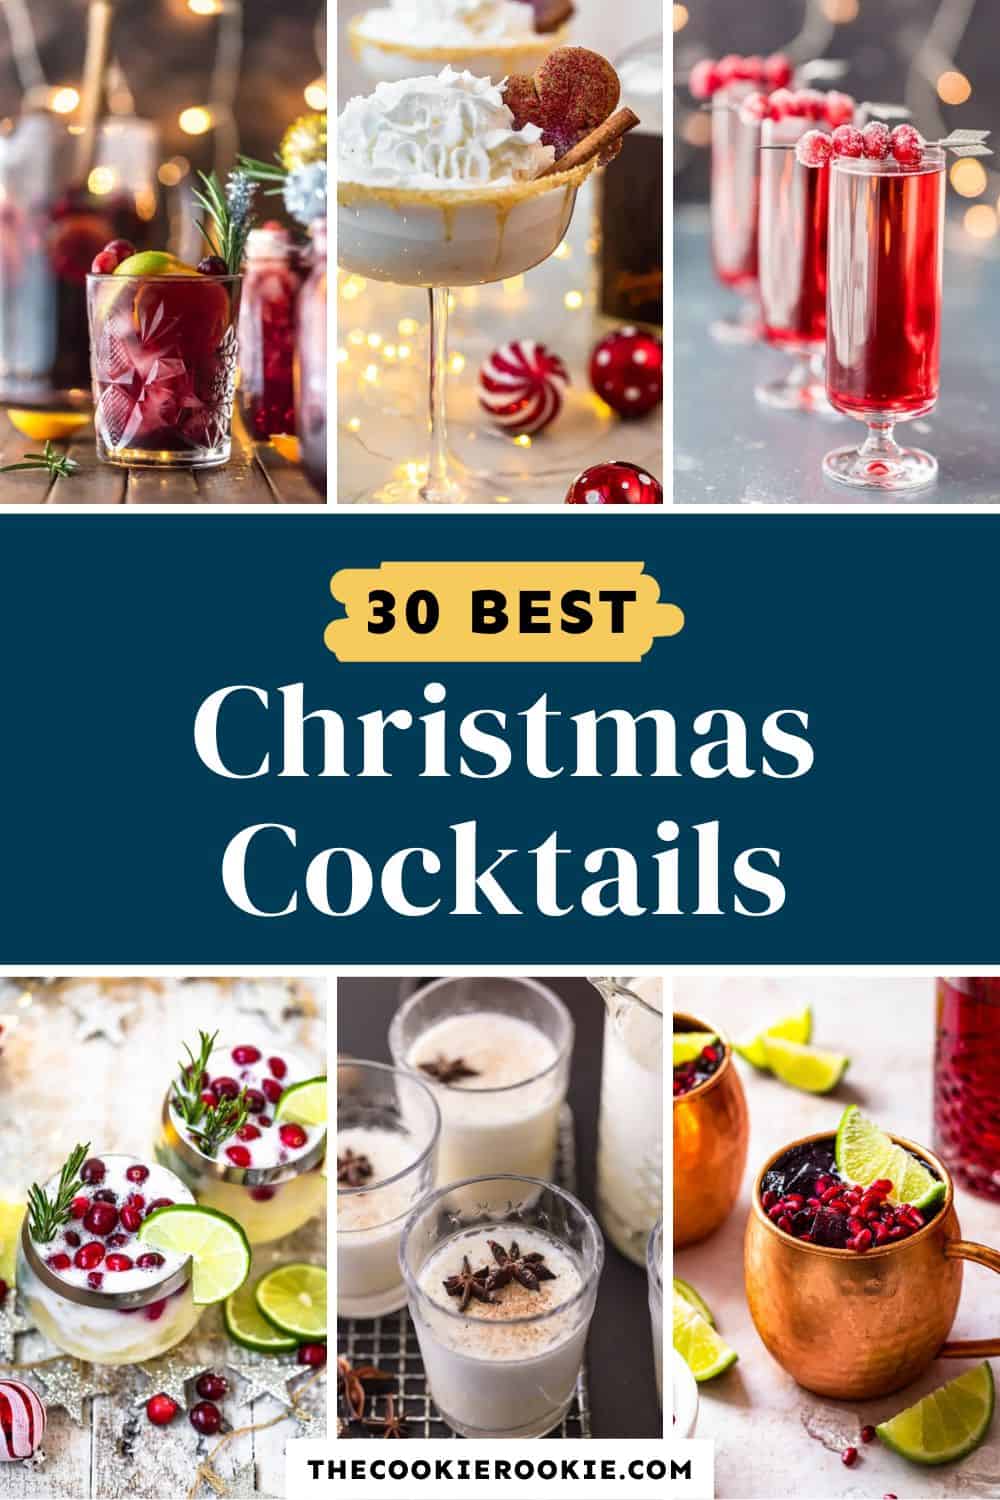 Festive Pitcher Cocktail Recipes for a Memorable Christmas